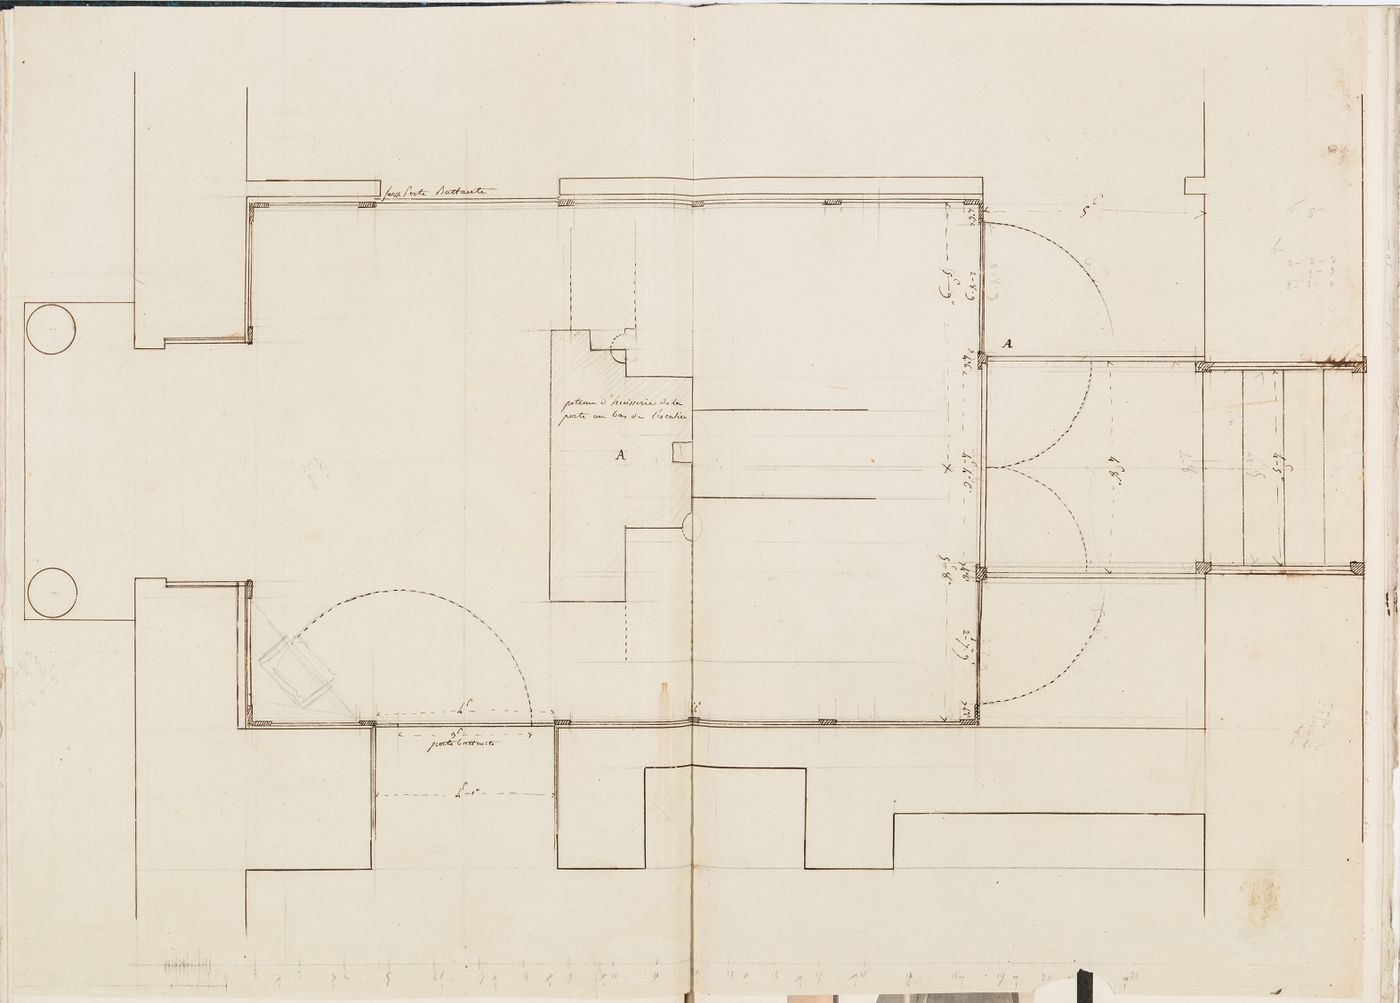 Plan, probably for the entrance hall of the house, Domaine de La Vallée; verso: Sketch plan, possibly for the entrance hall of the house, Domaine de La Vallée and an elevation of an unidentified building